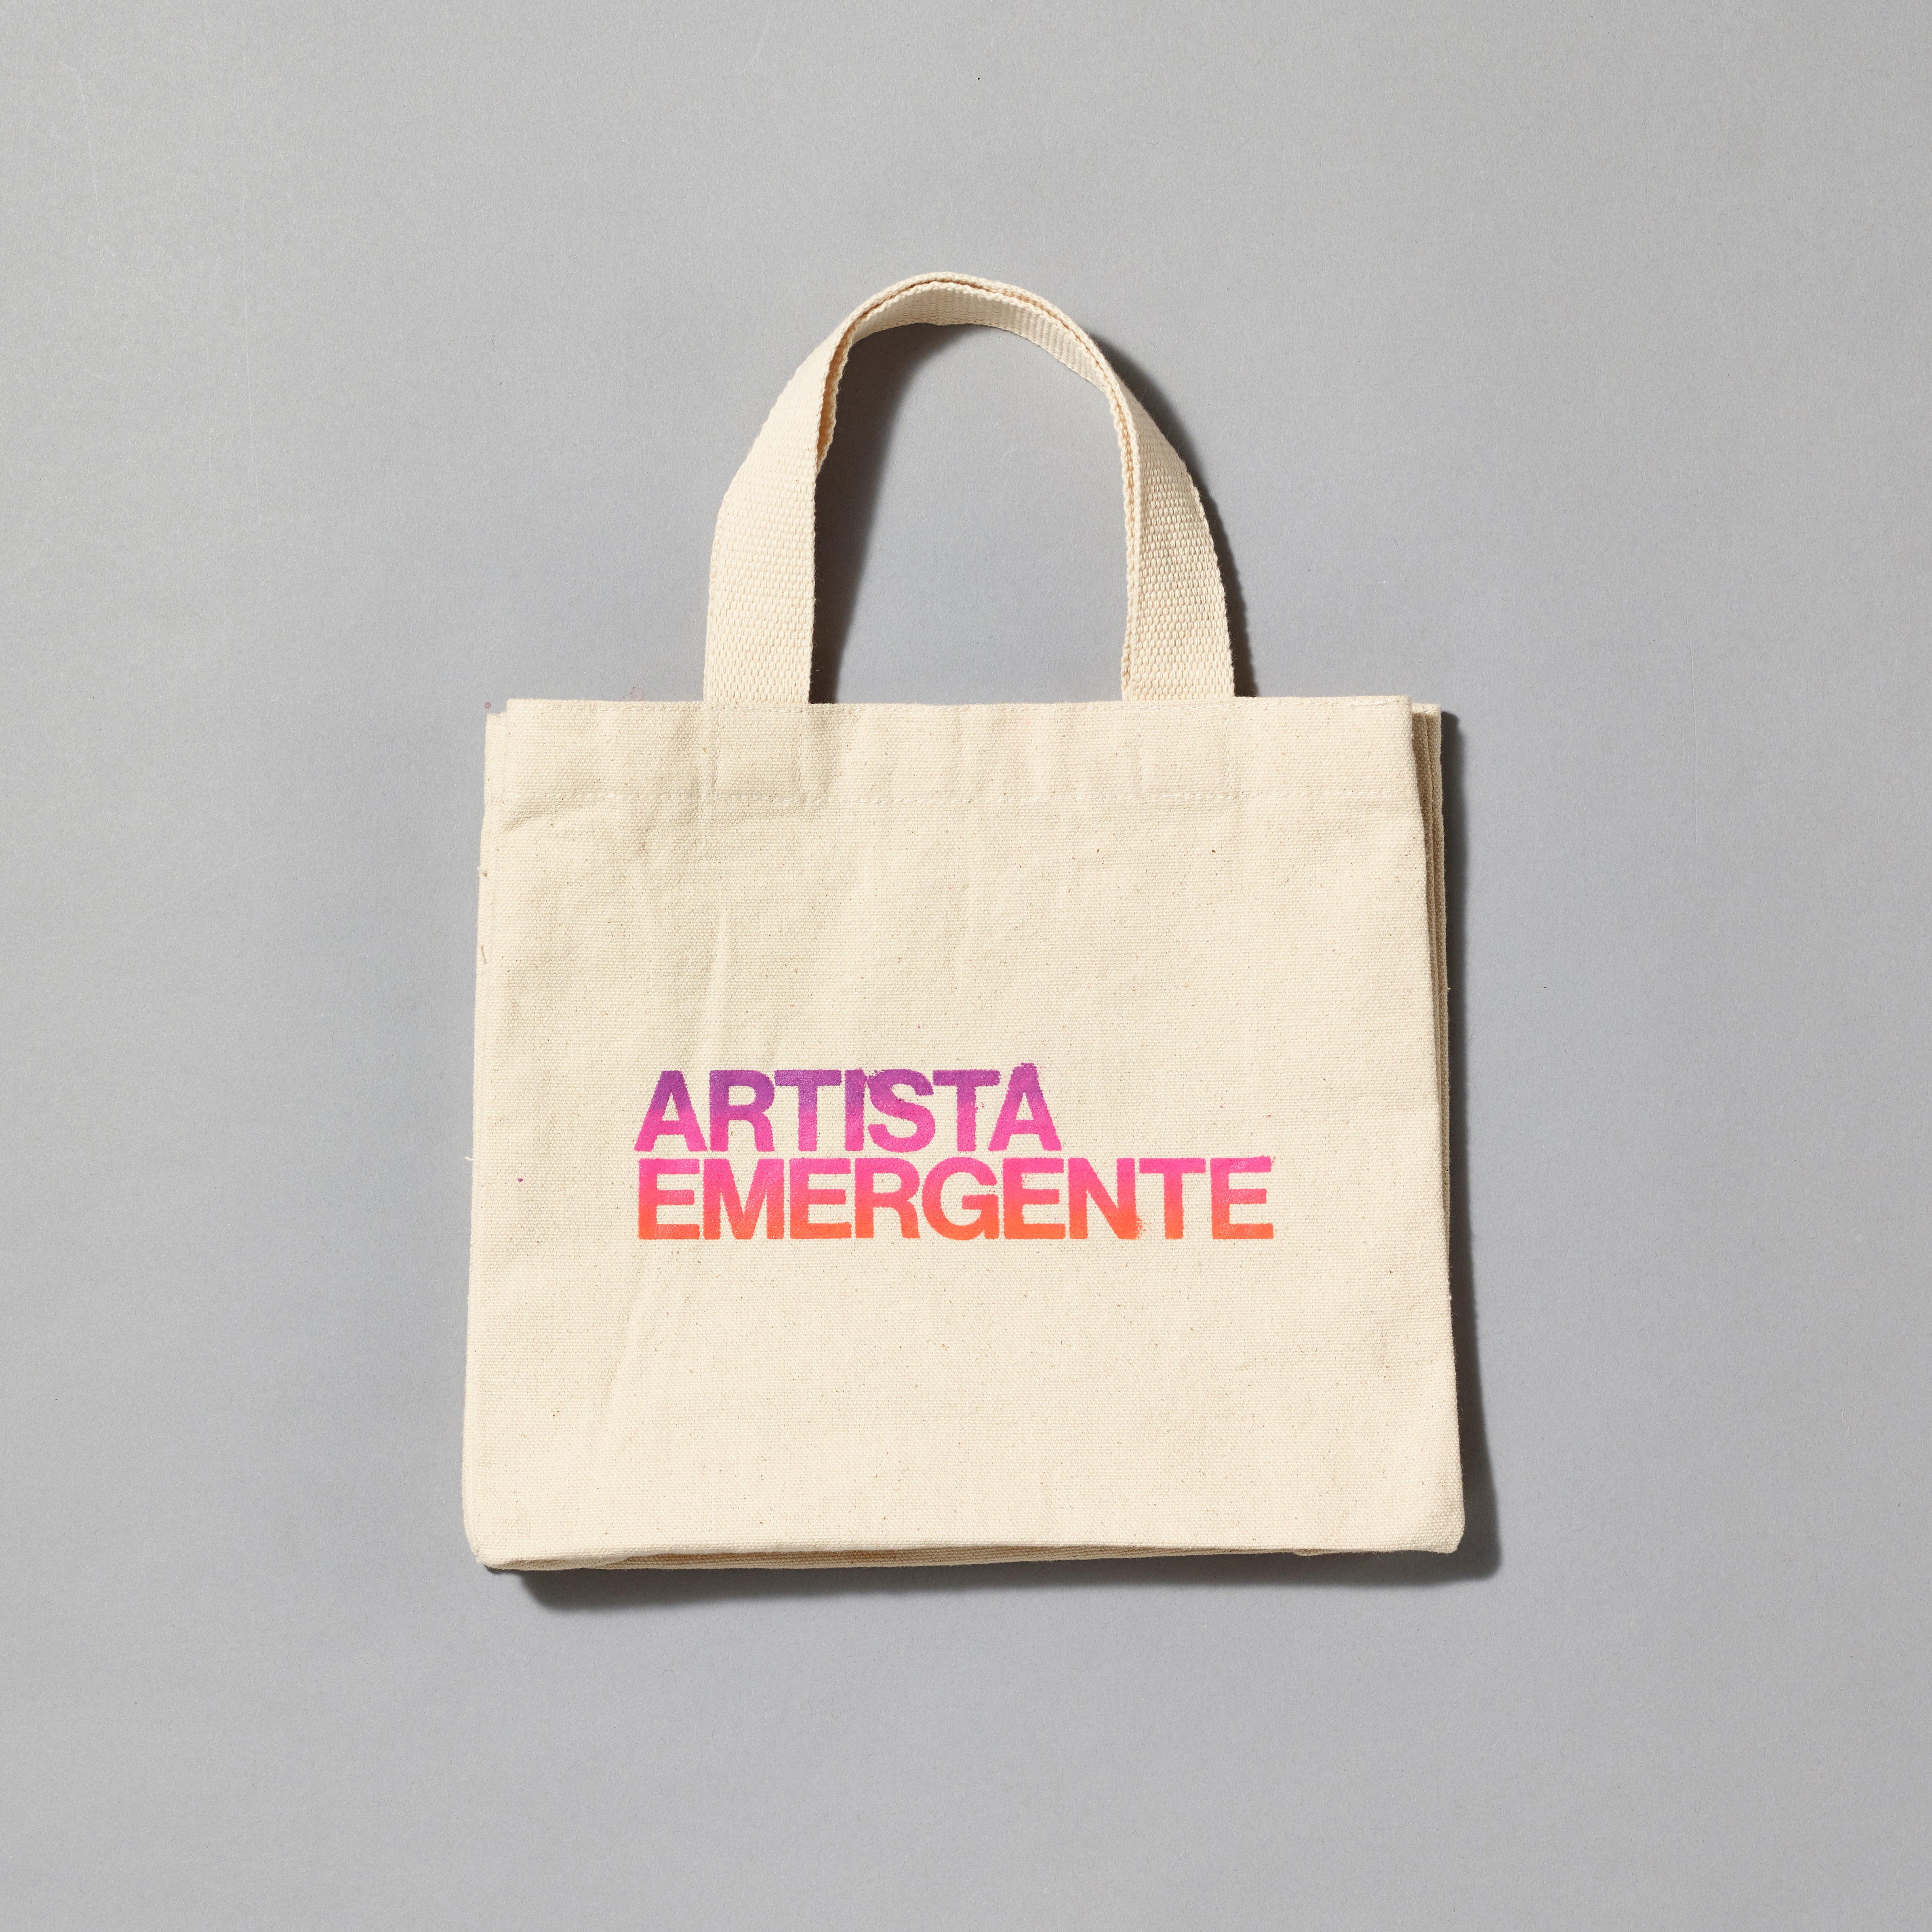 100% cotton canvas tote with Artista Emergente printed in a purple, pink, and orange gradient. Measures 8.75" H x 10.75" L x 3" W